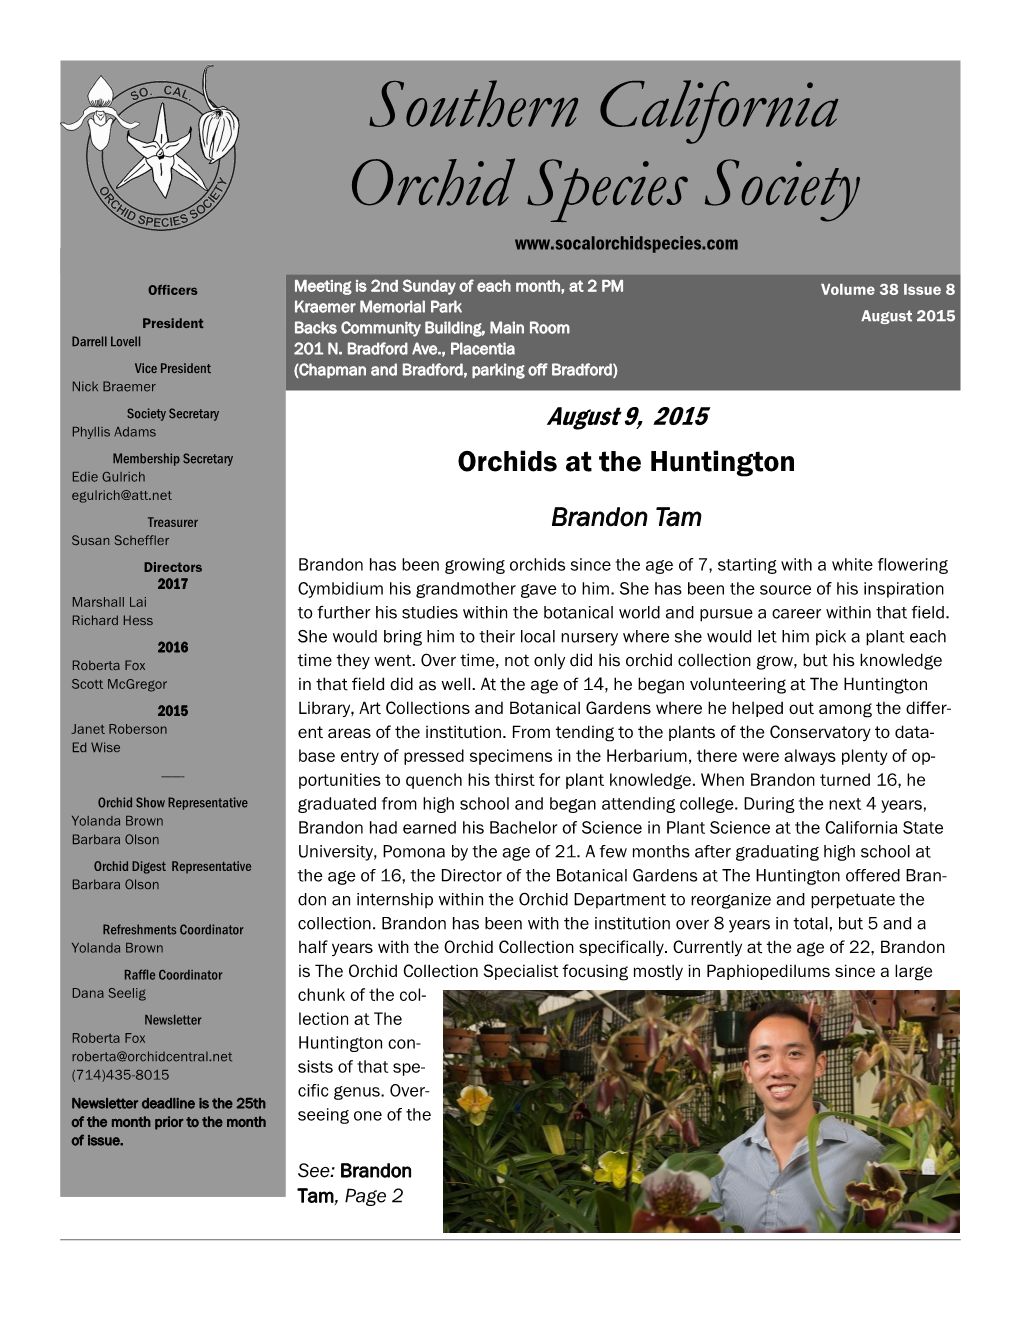 Southern California Orchid Species Society